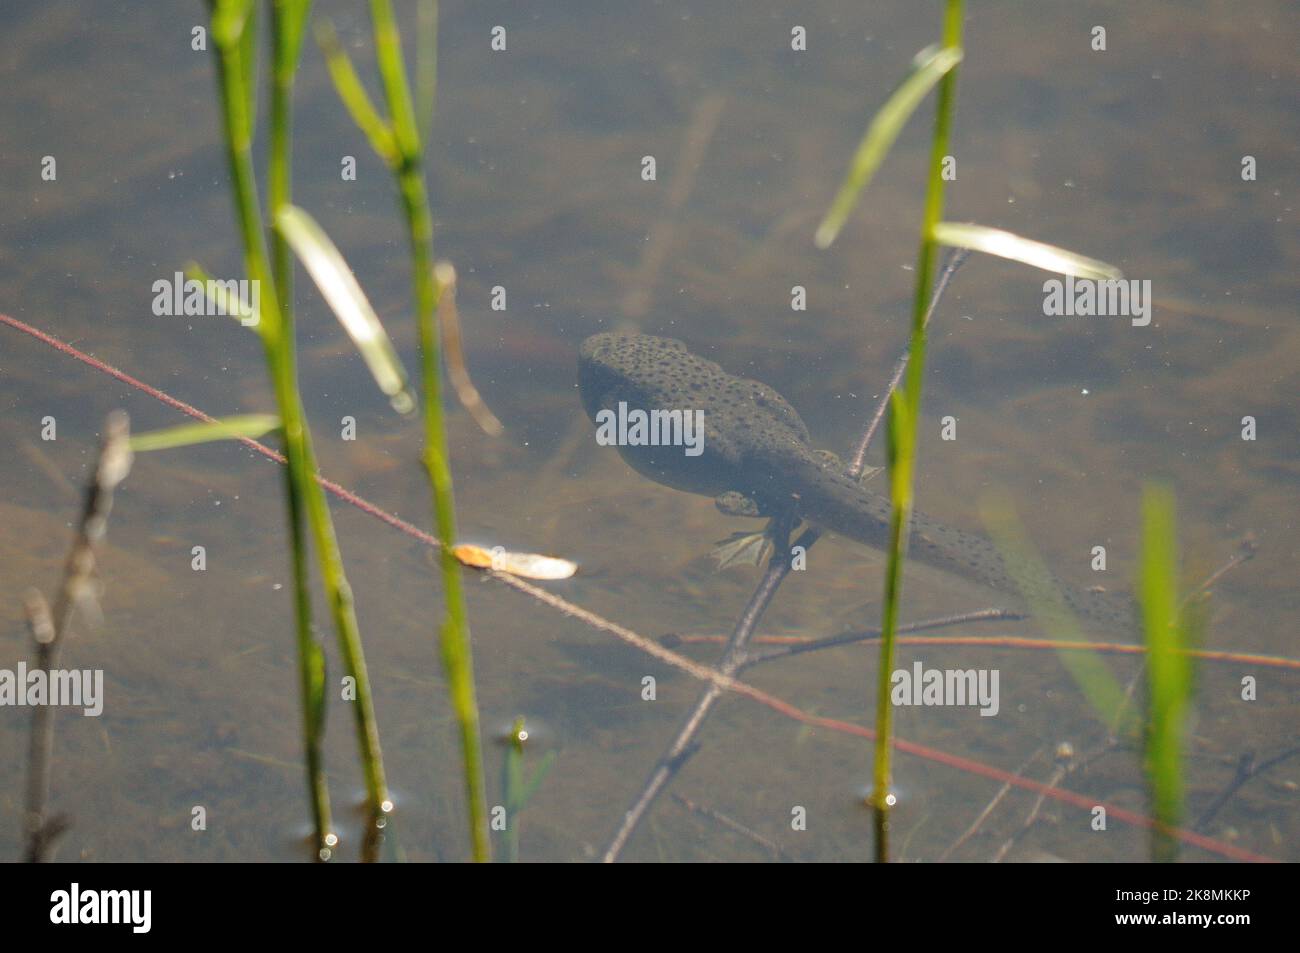 Frog Tadpole swimming in a pond with blur water displaying long tail, legs in its environment and habitat surrounding. Stock Photo